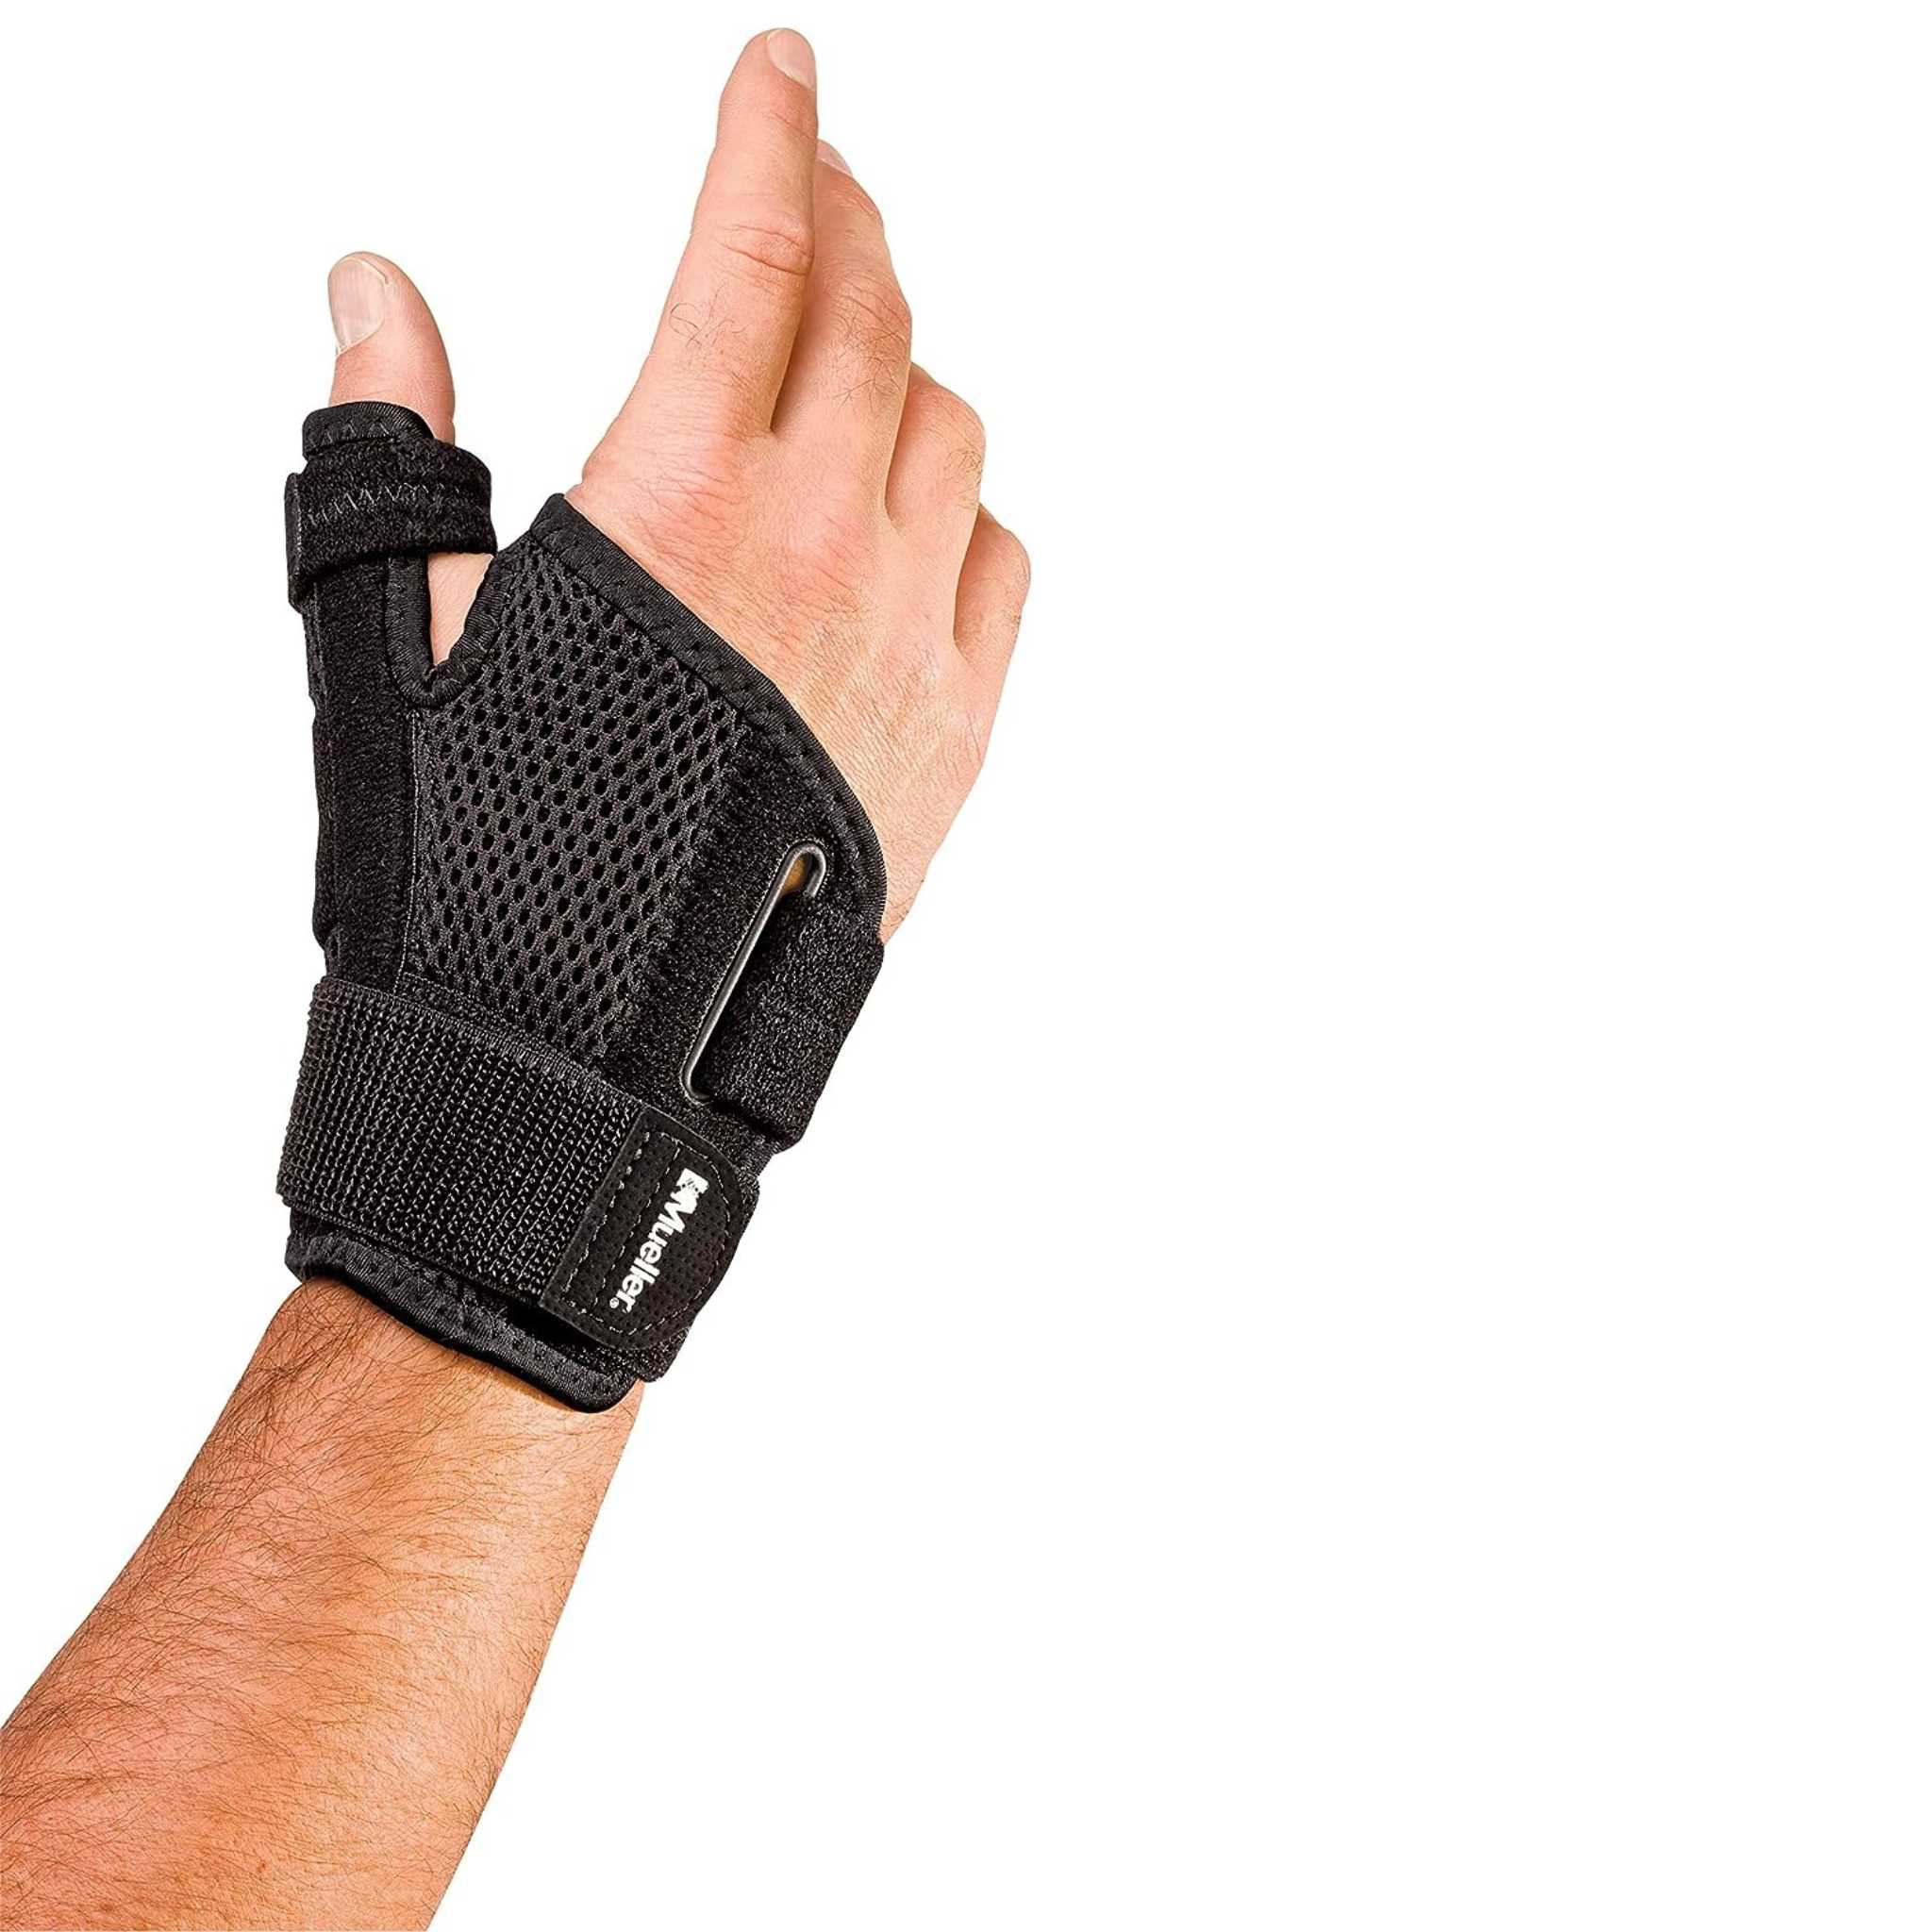 Mueller Adjustable Elbow Support: One Size Fits Most (Black) 